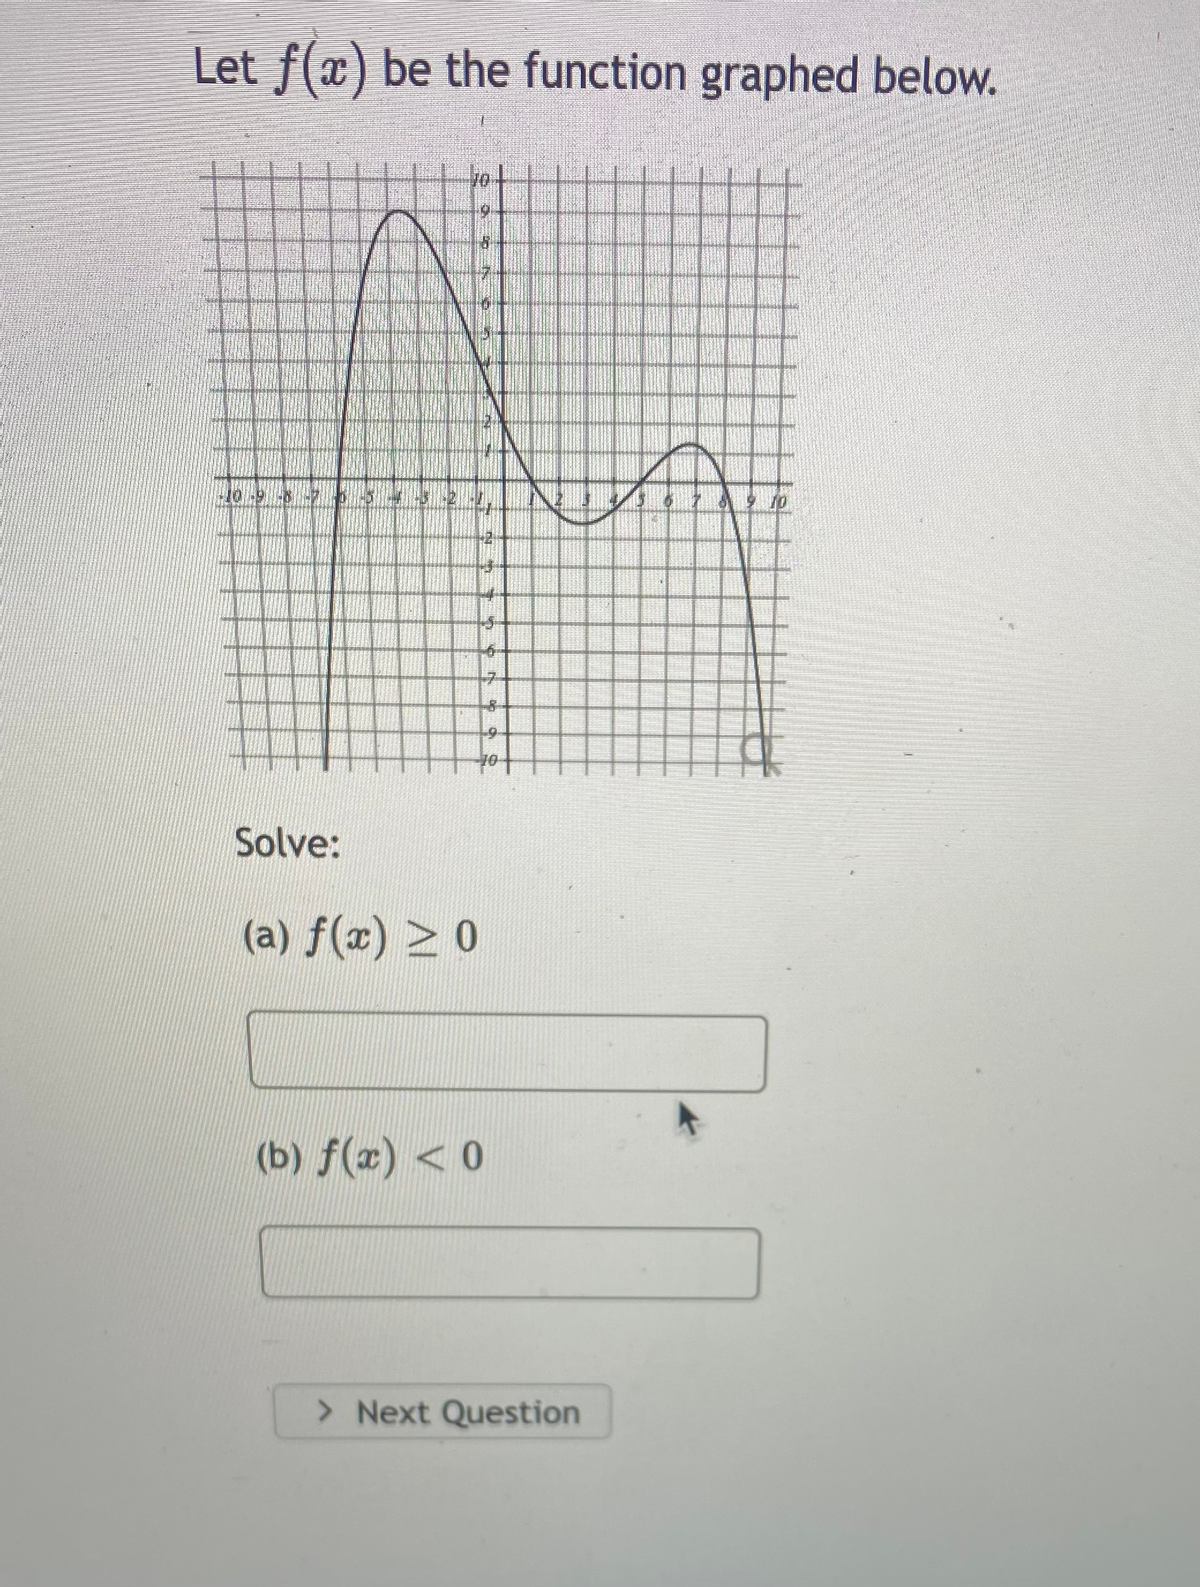 Let f(x) be the function graphed below.
10
6-
-7-
Solve:
(a) f(x) > 0
(b) f(x) < 0
> Next Question
